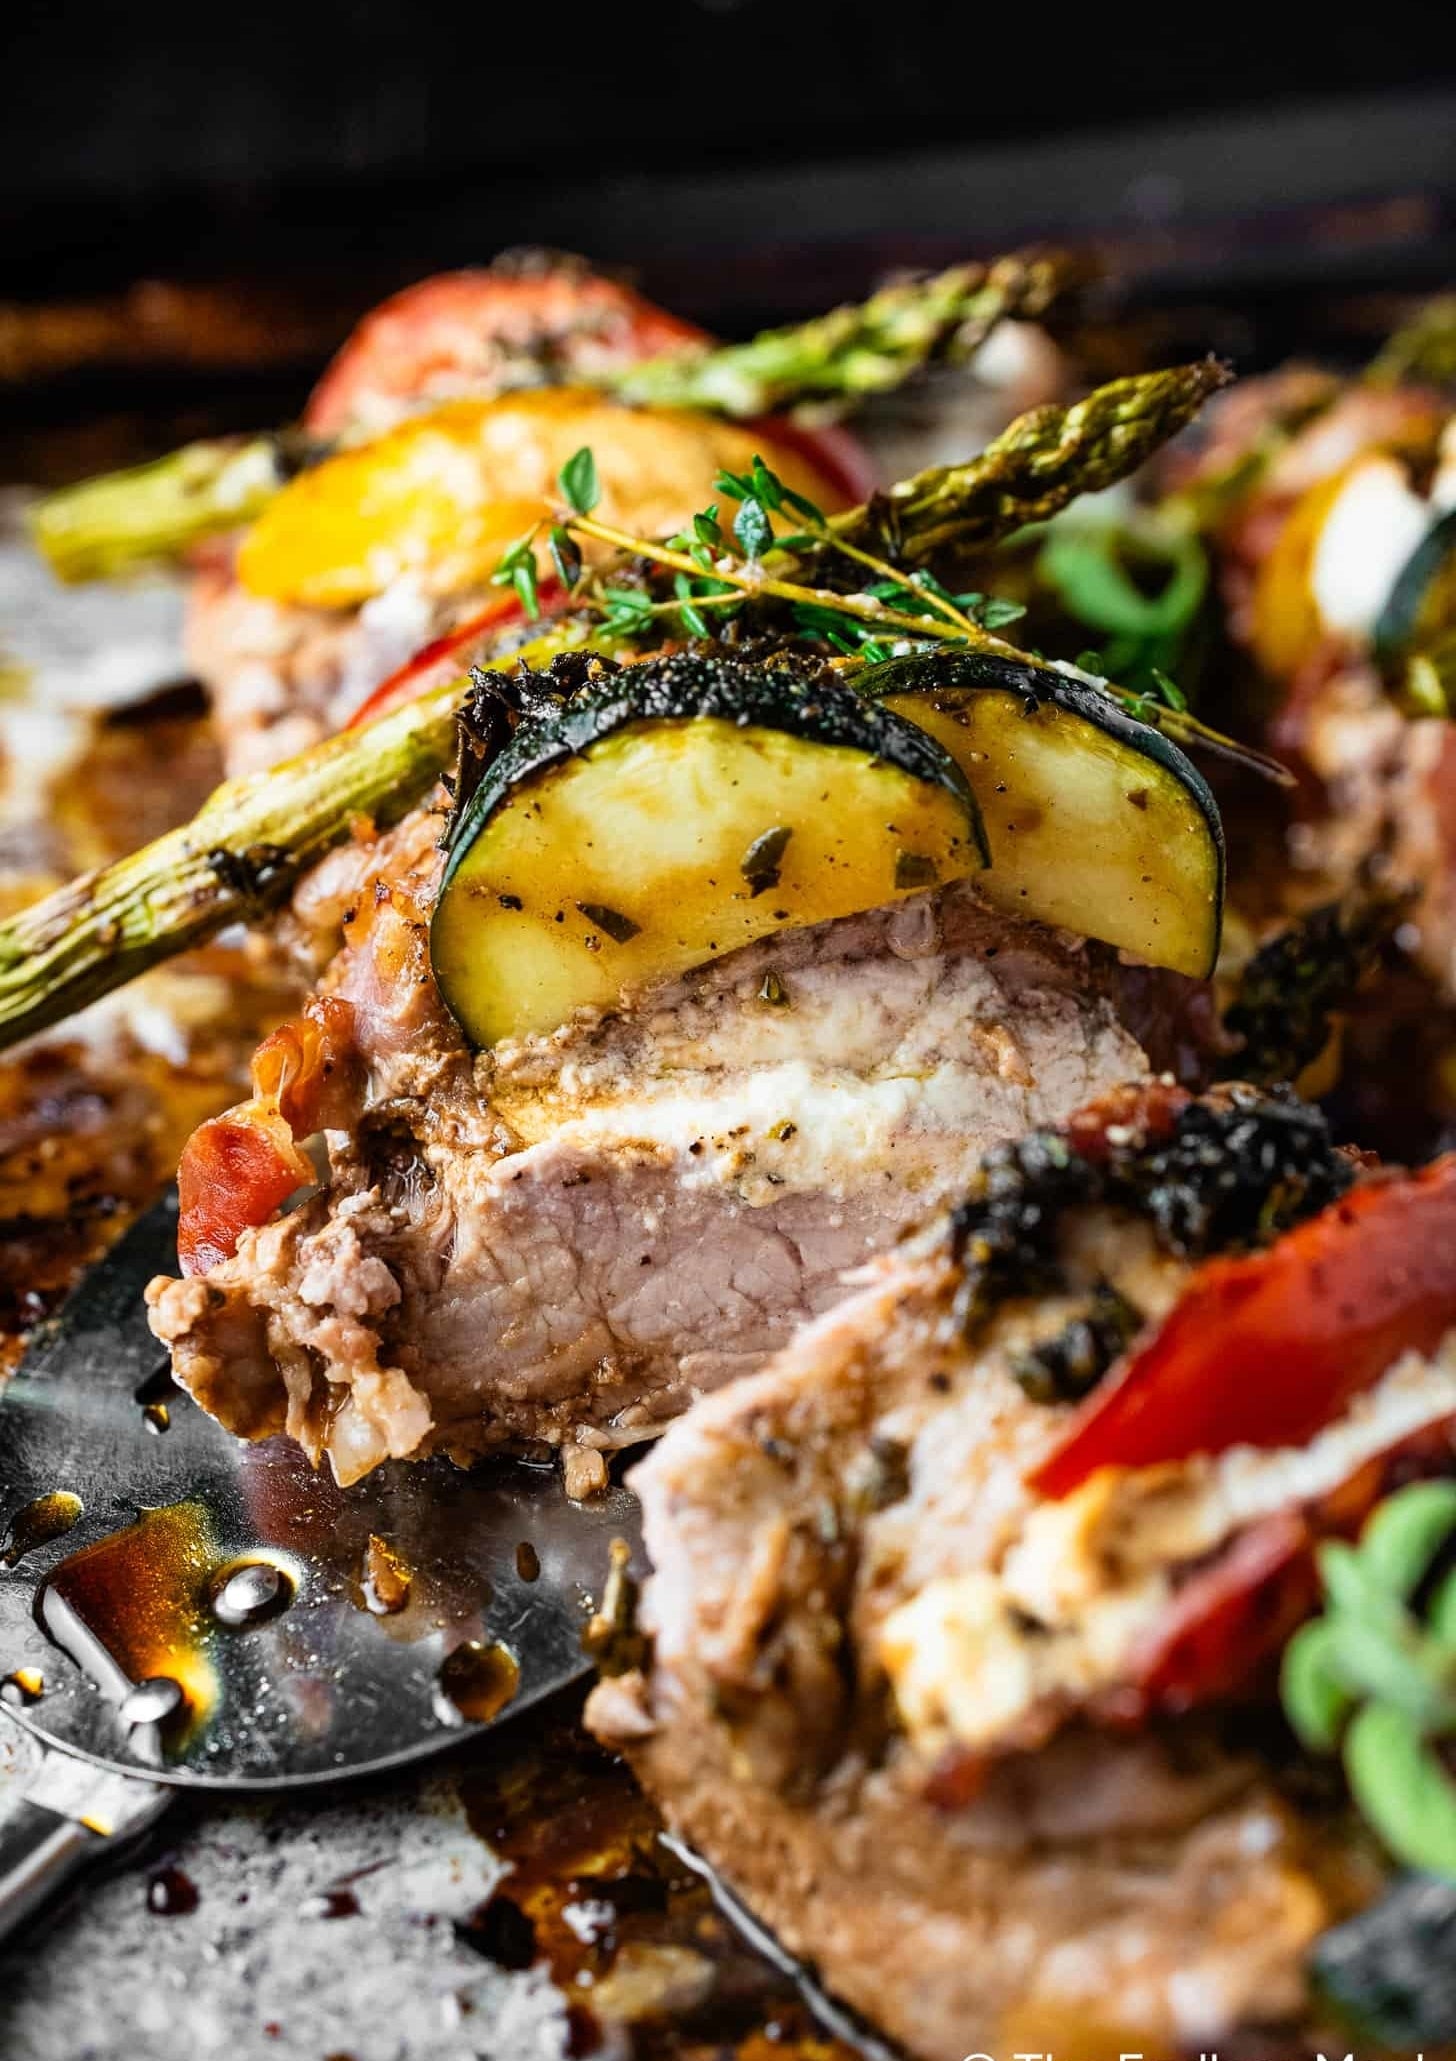 Grilled pork topped with zucchini and asparagus, fresh herbs on the side, on a rustic metal spatula